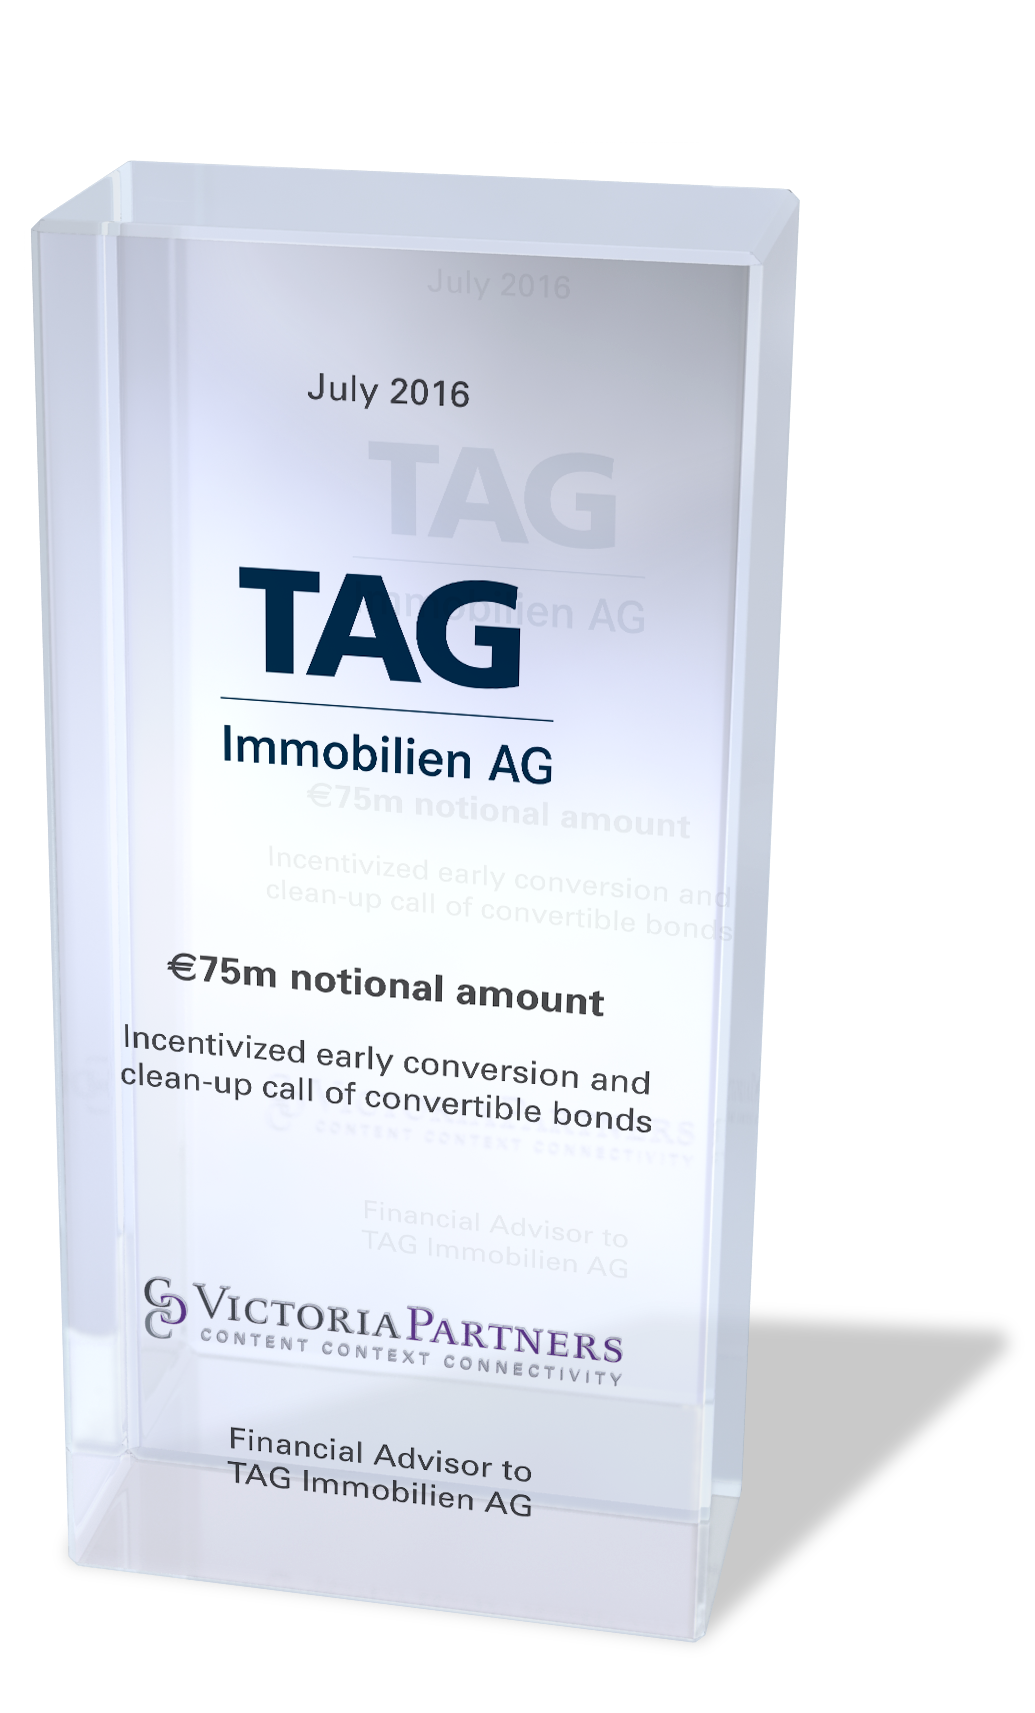 VICTORIAPARTNERS - Financial Advisor to TAG Immobilien AG - July 2016